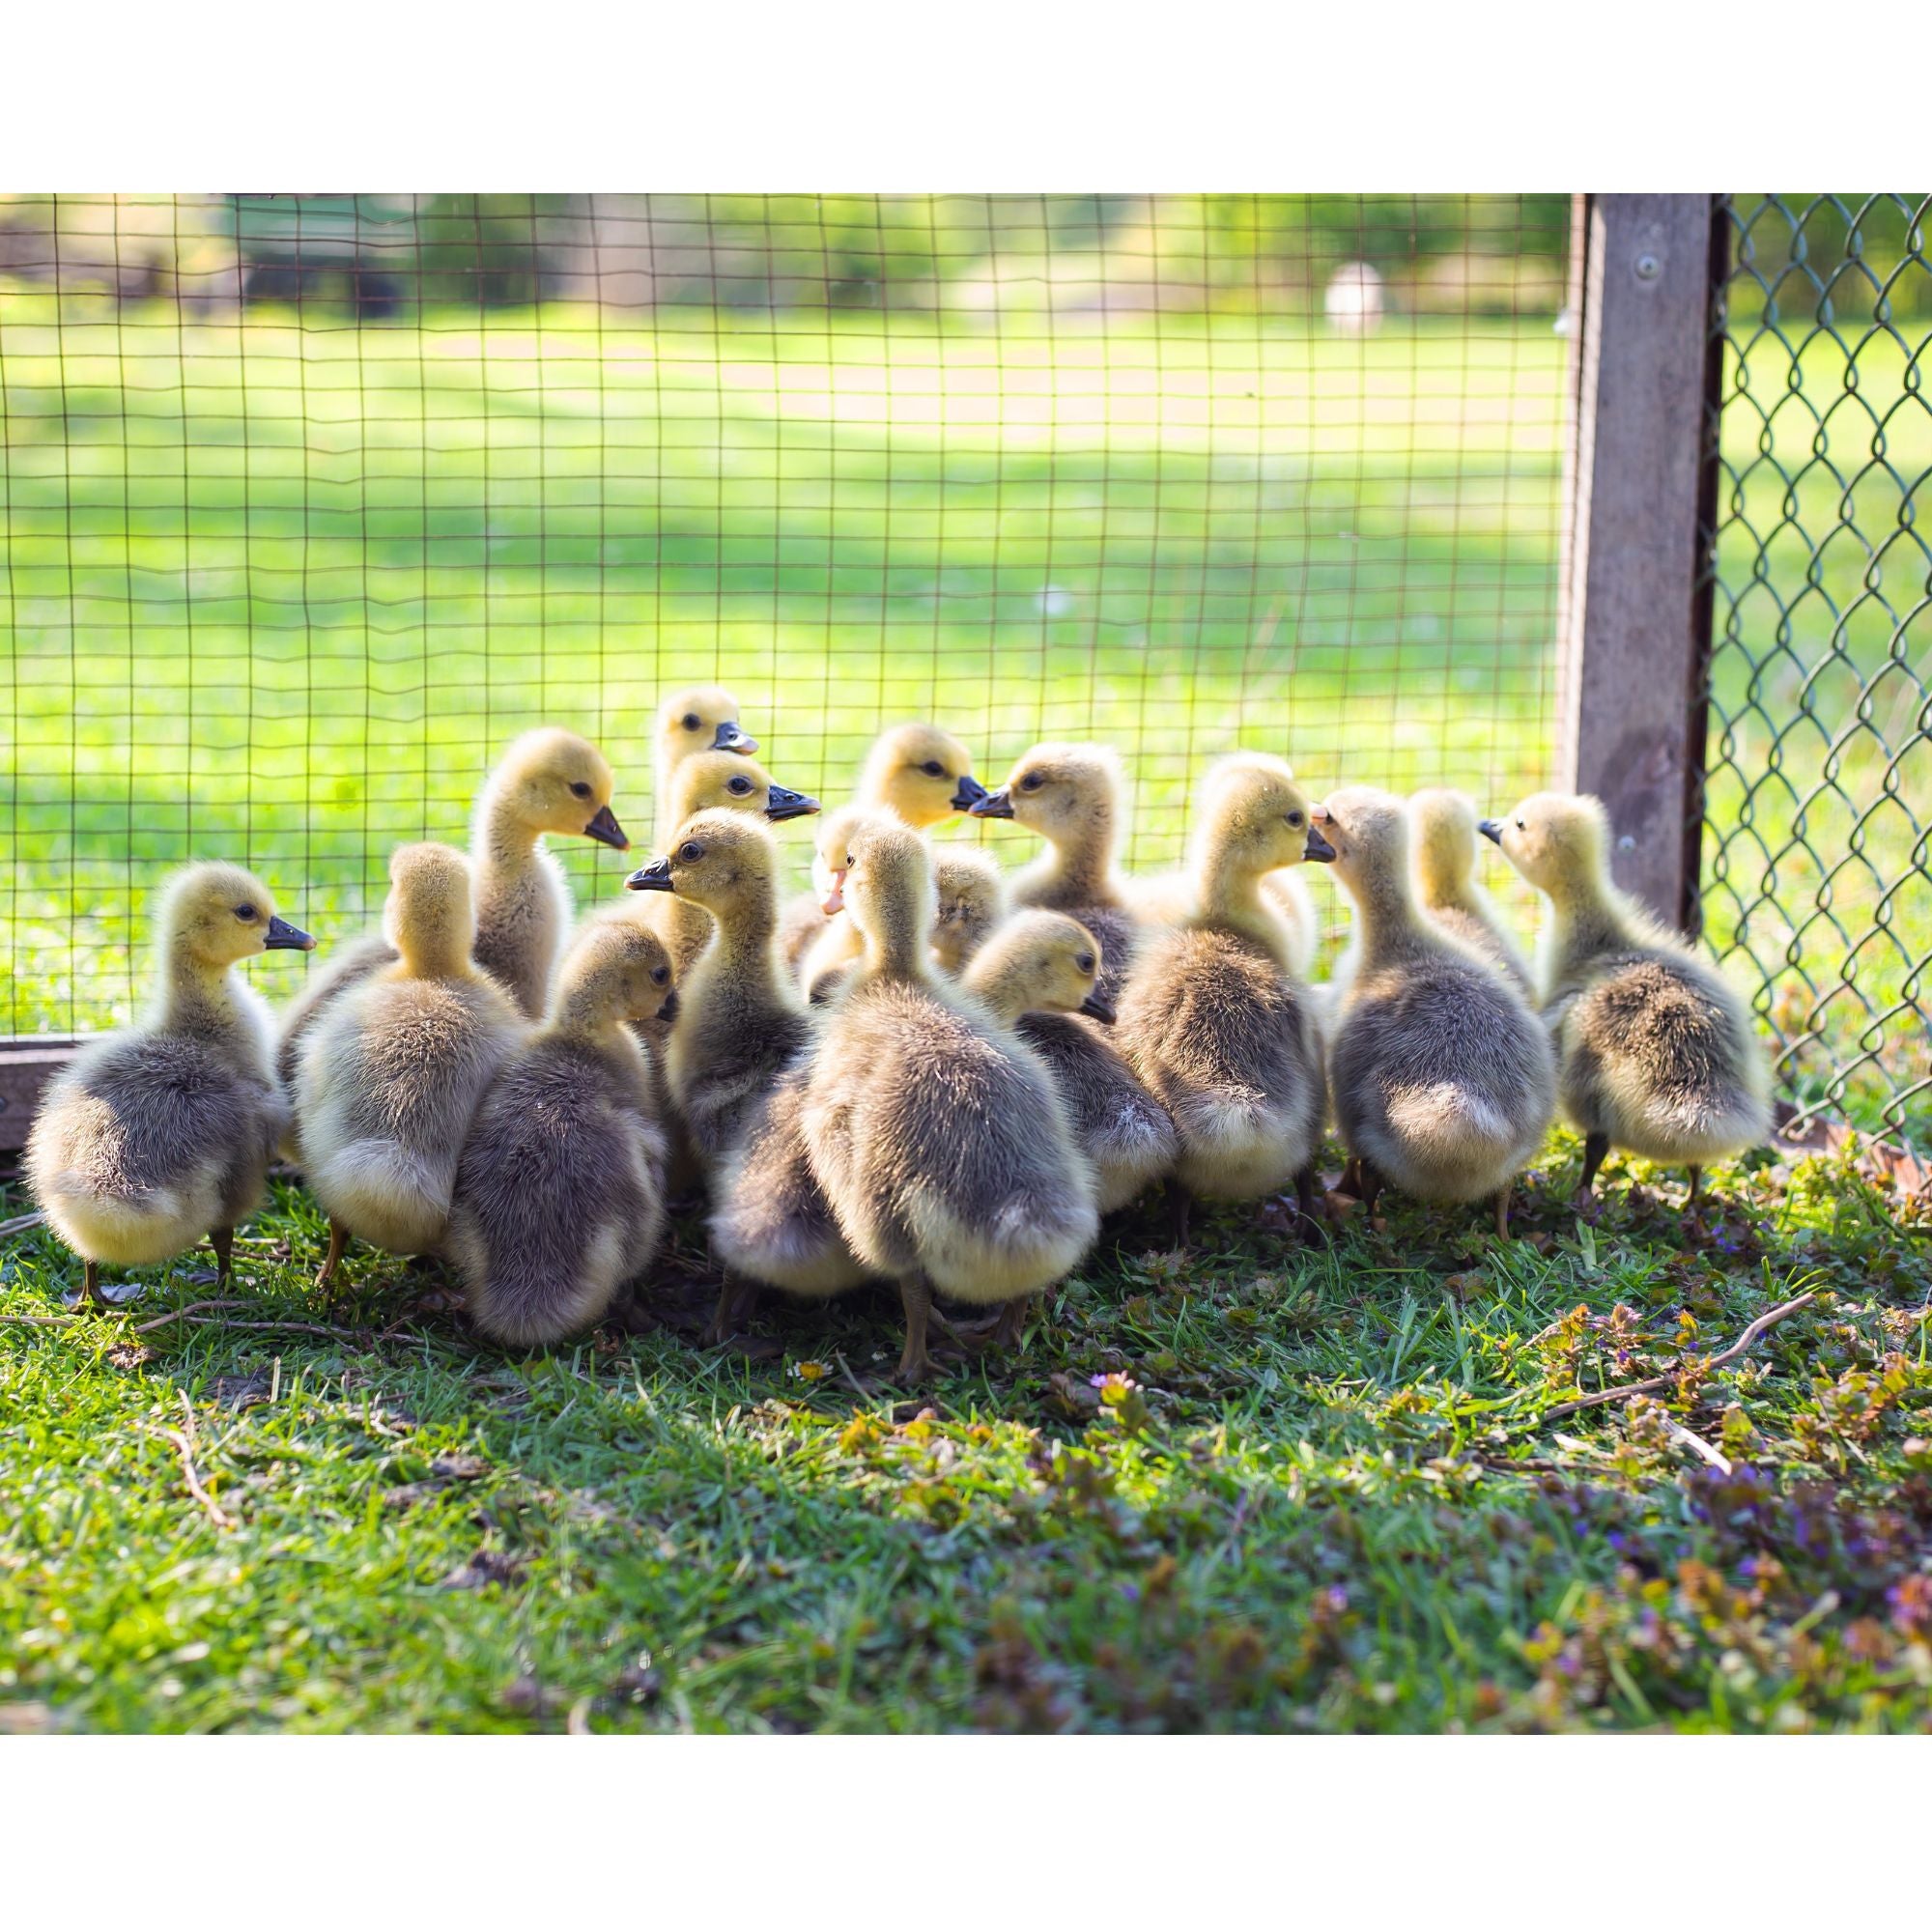 It's important to slowly introduce new geese to the existing flock. 